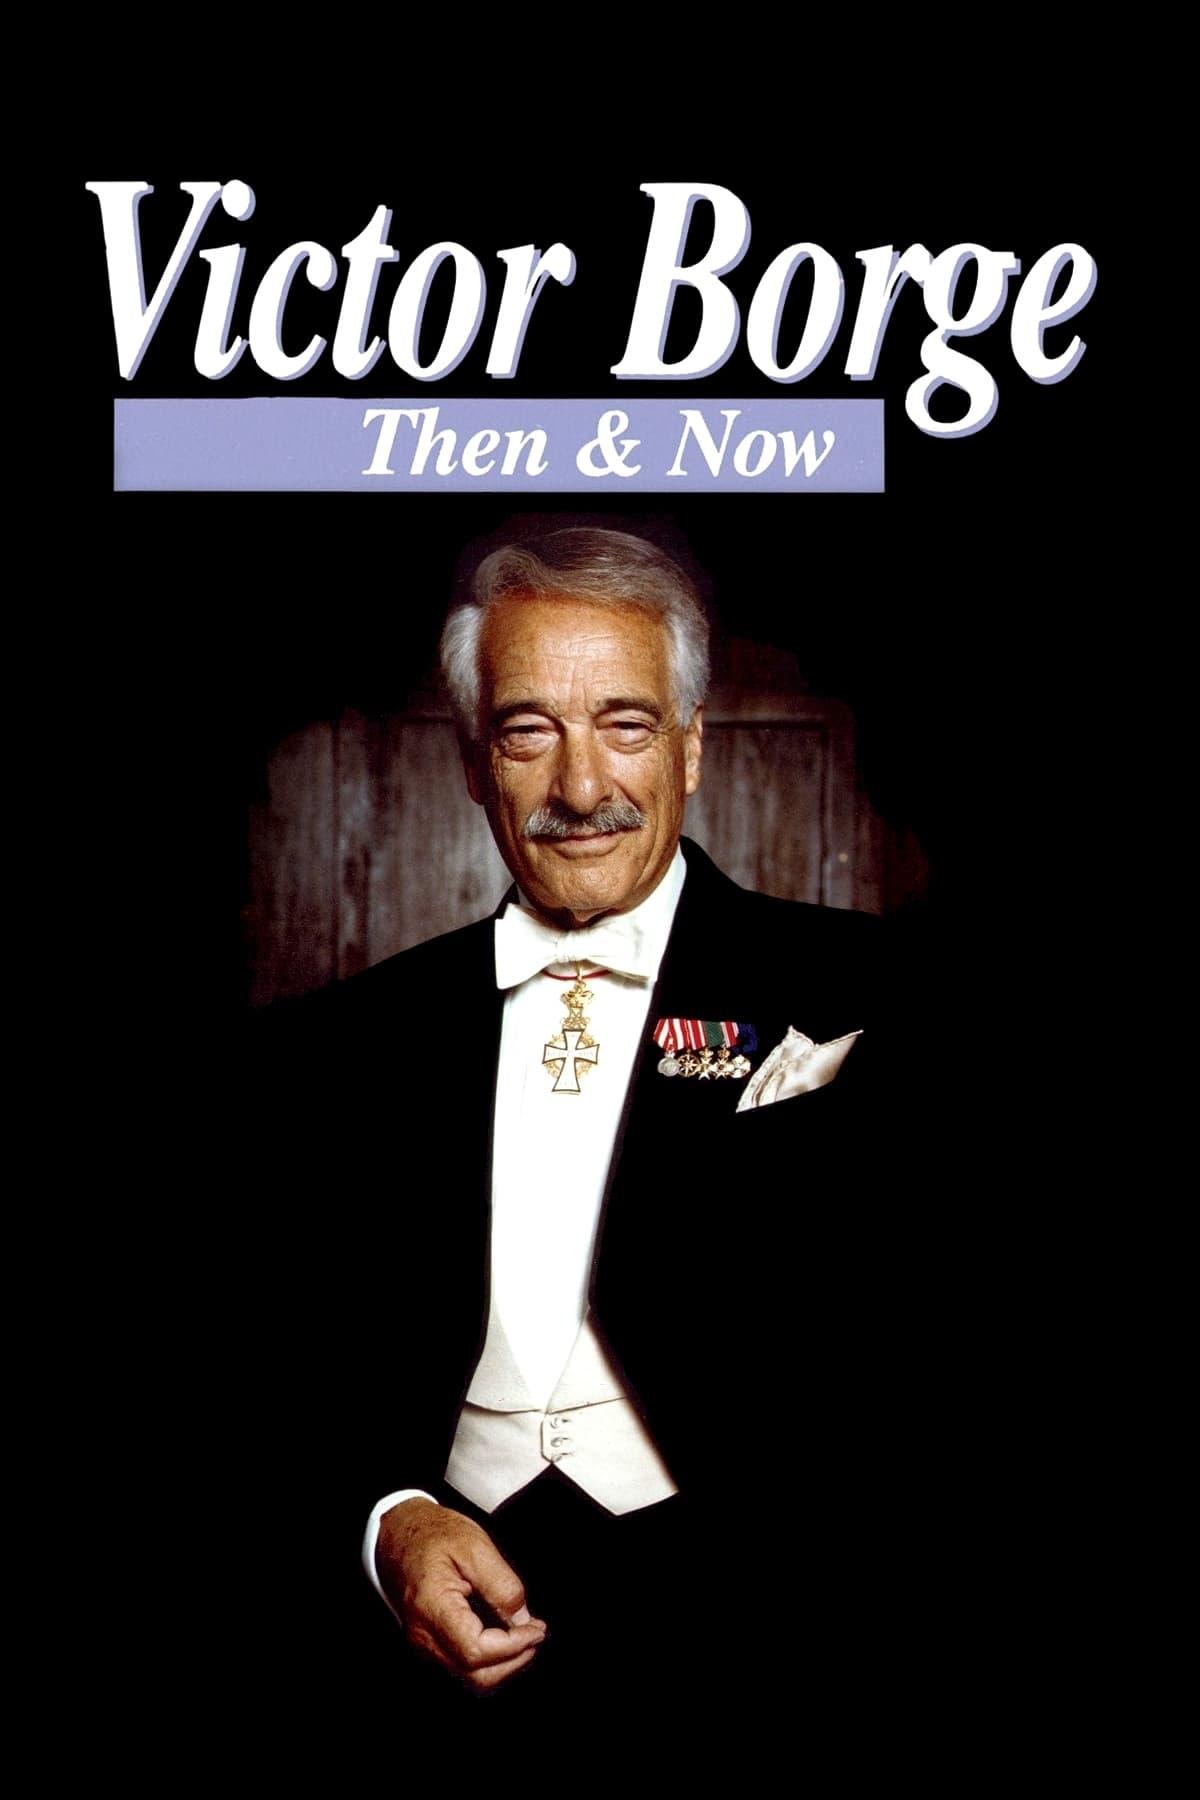 Victor Borge: Then & Now poster